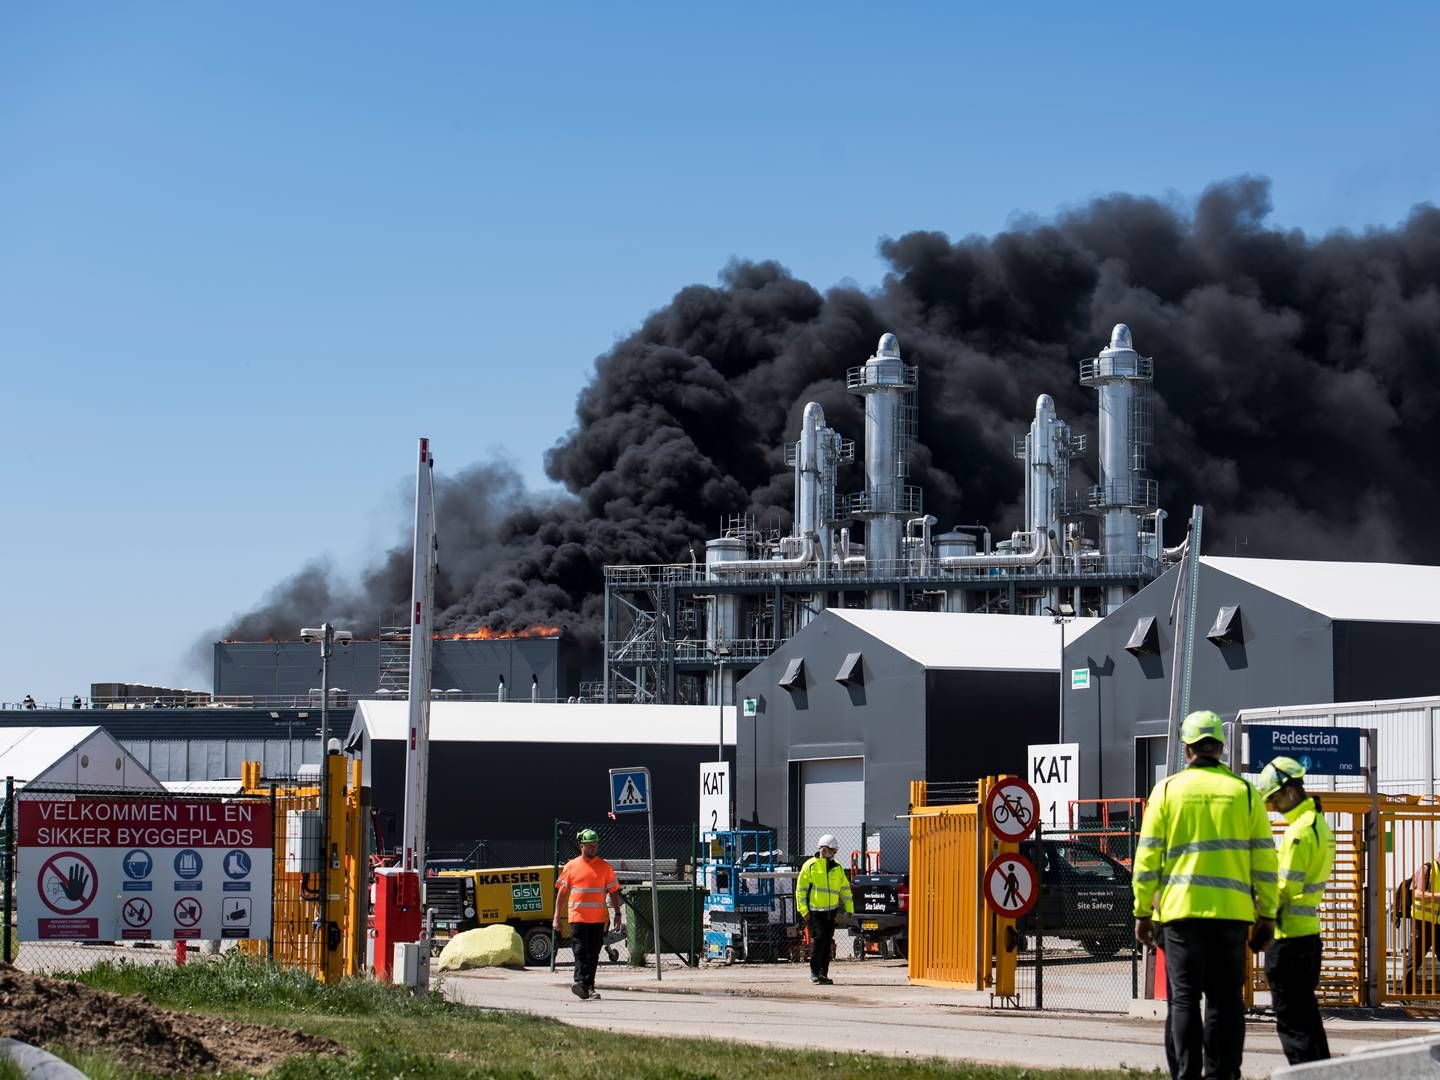 On May 16, a major fire broke out at Novo Nordisk's construction site in Kalundborg. Internal minutes from a safety meeting link the cause of the fire to people working illegally. | Photo: Jokum Tord Larsen/Ritzau Scanpix